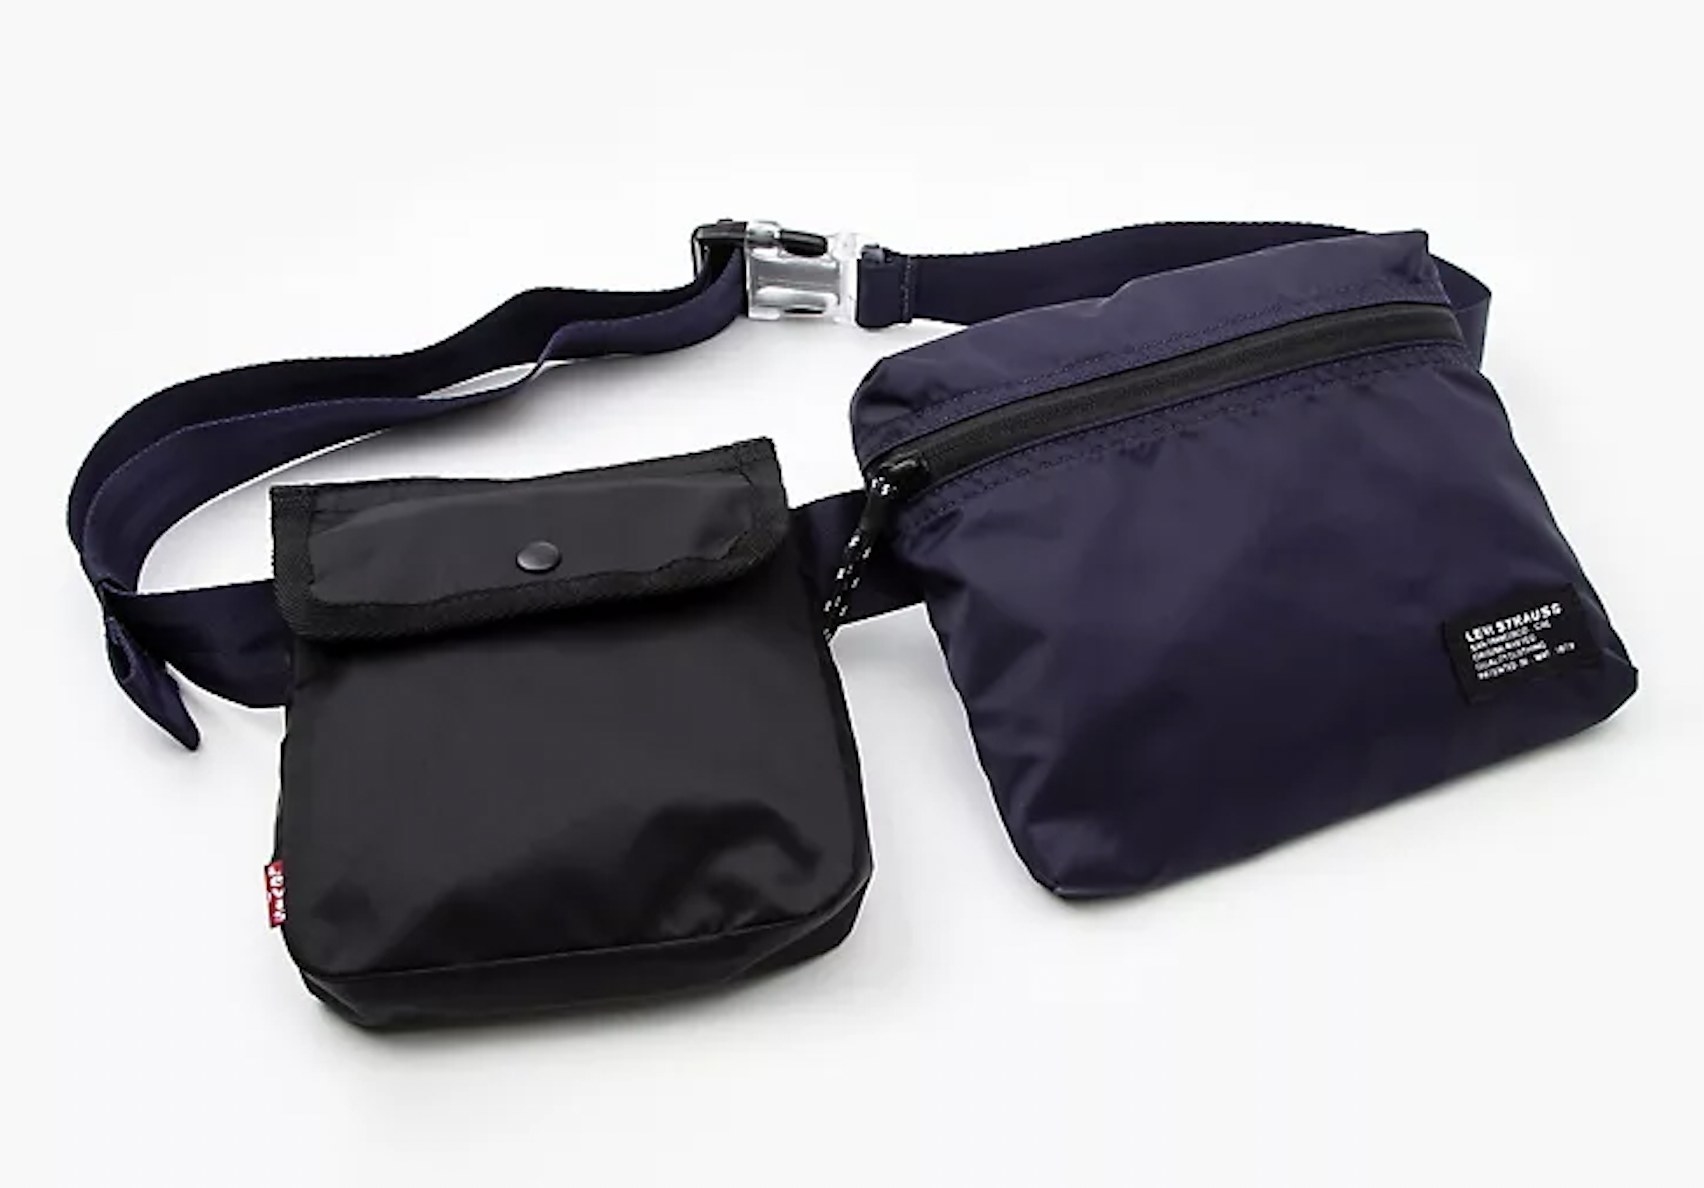 the bag with two compartments: a blue one with a zipper, and a black one with a button flap